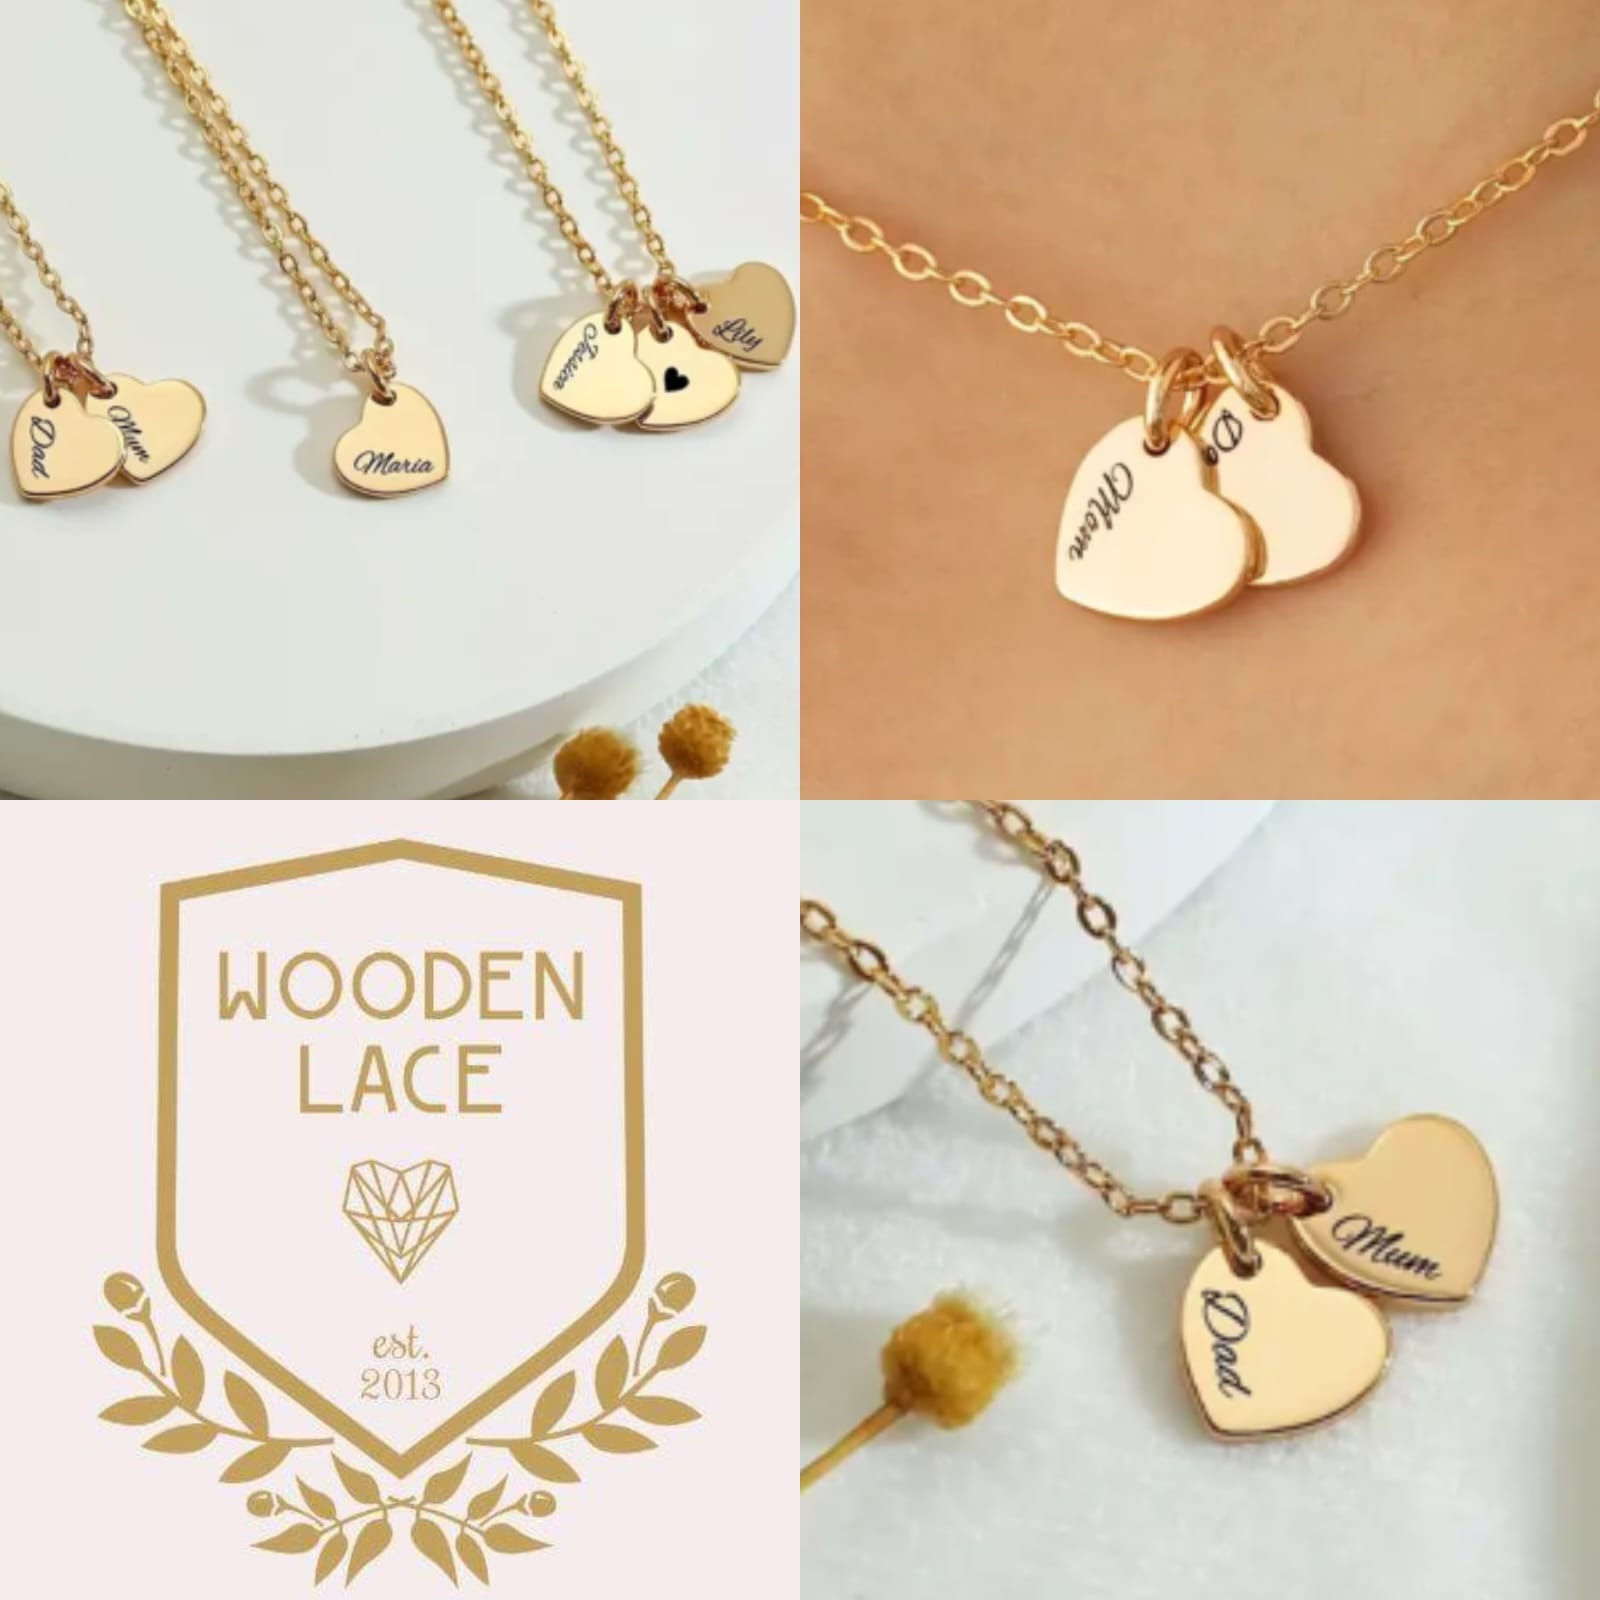 Engraved hearts necklace available in silver and gold. Starts at R850 for 2 hearts discs, R300 extra for each extra disc.